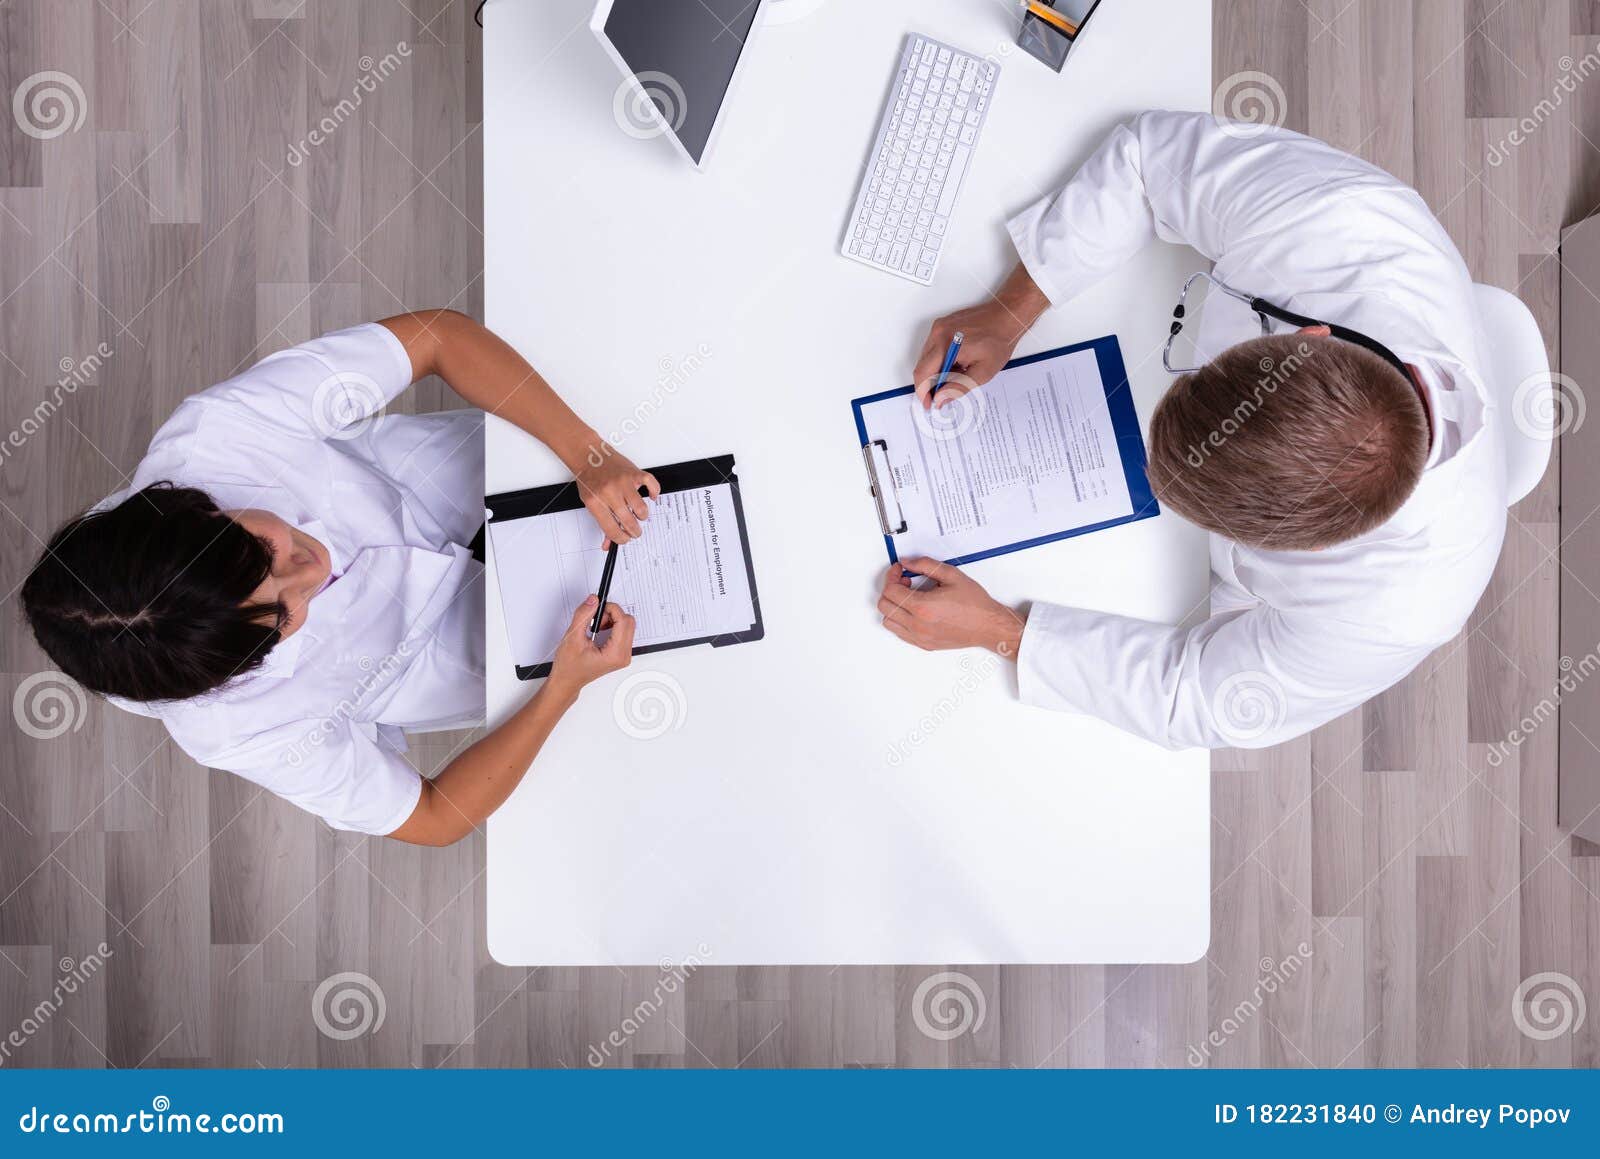 doctor and nurse sitting face to face having meeting